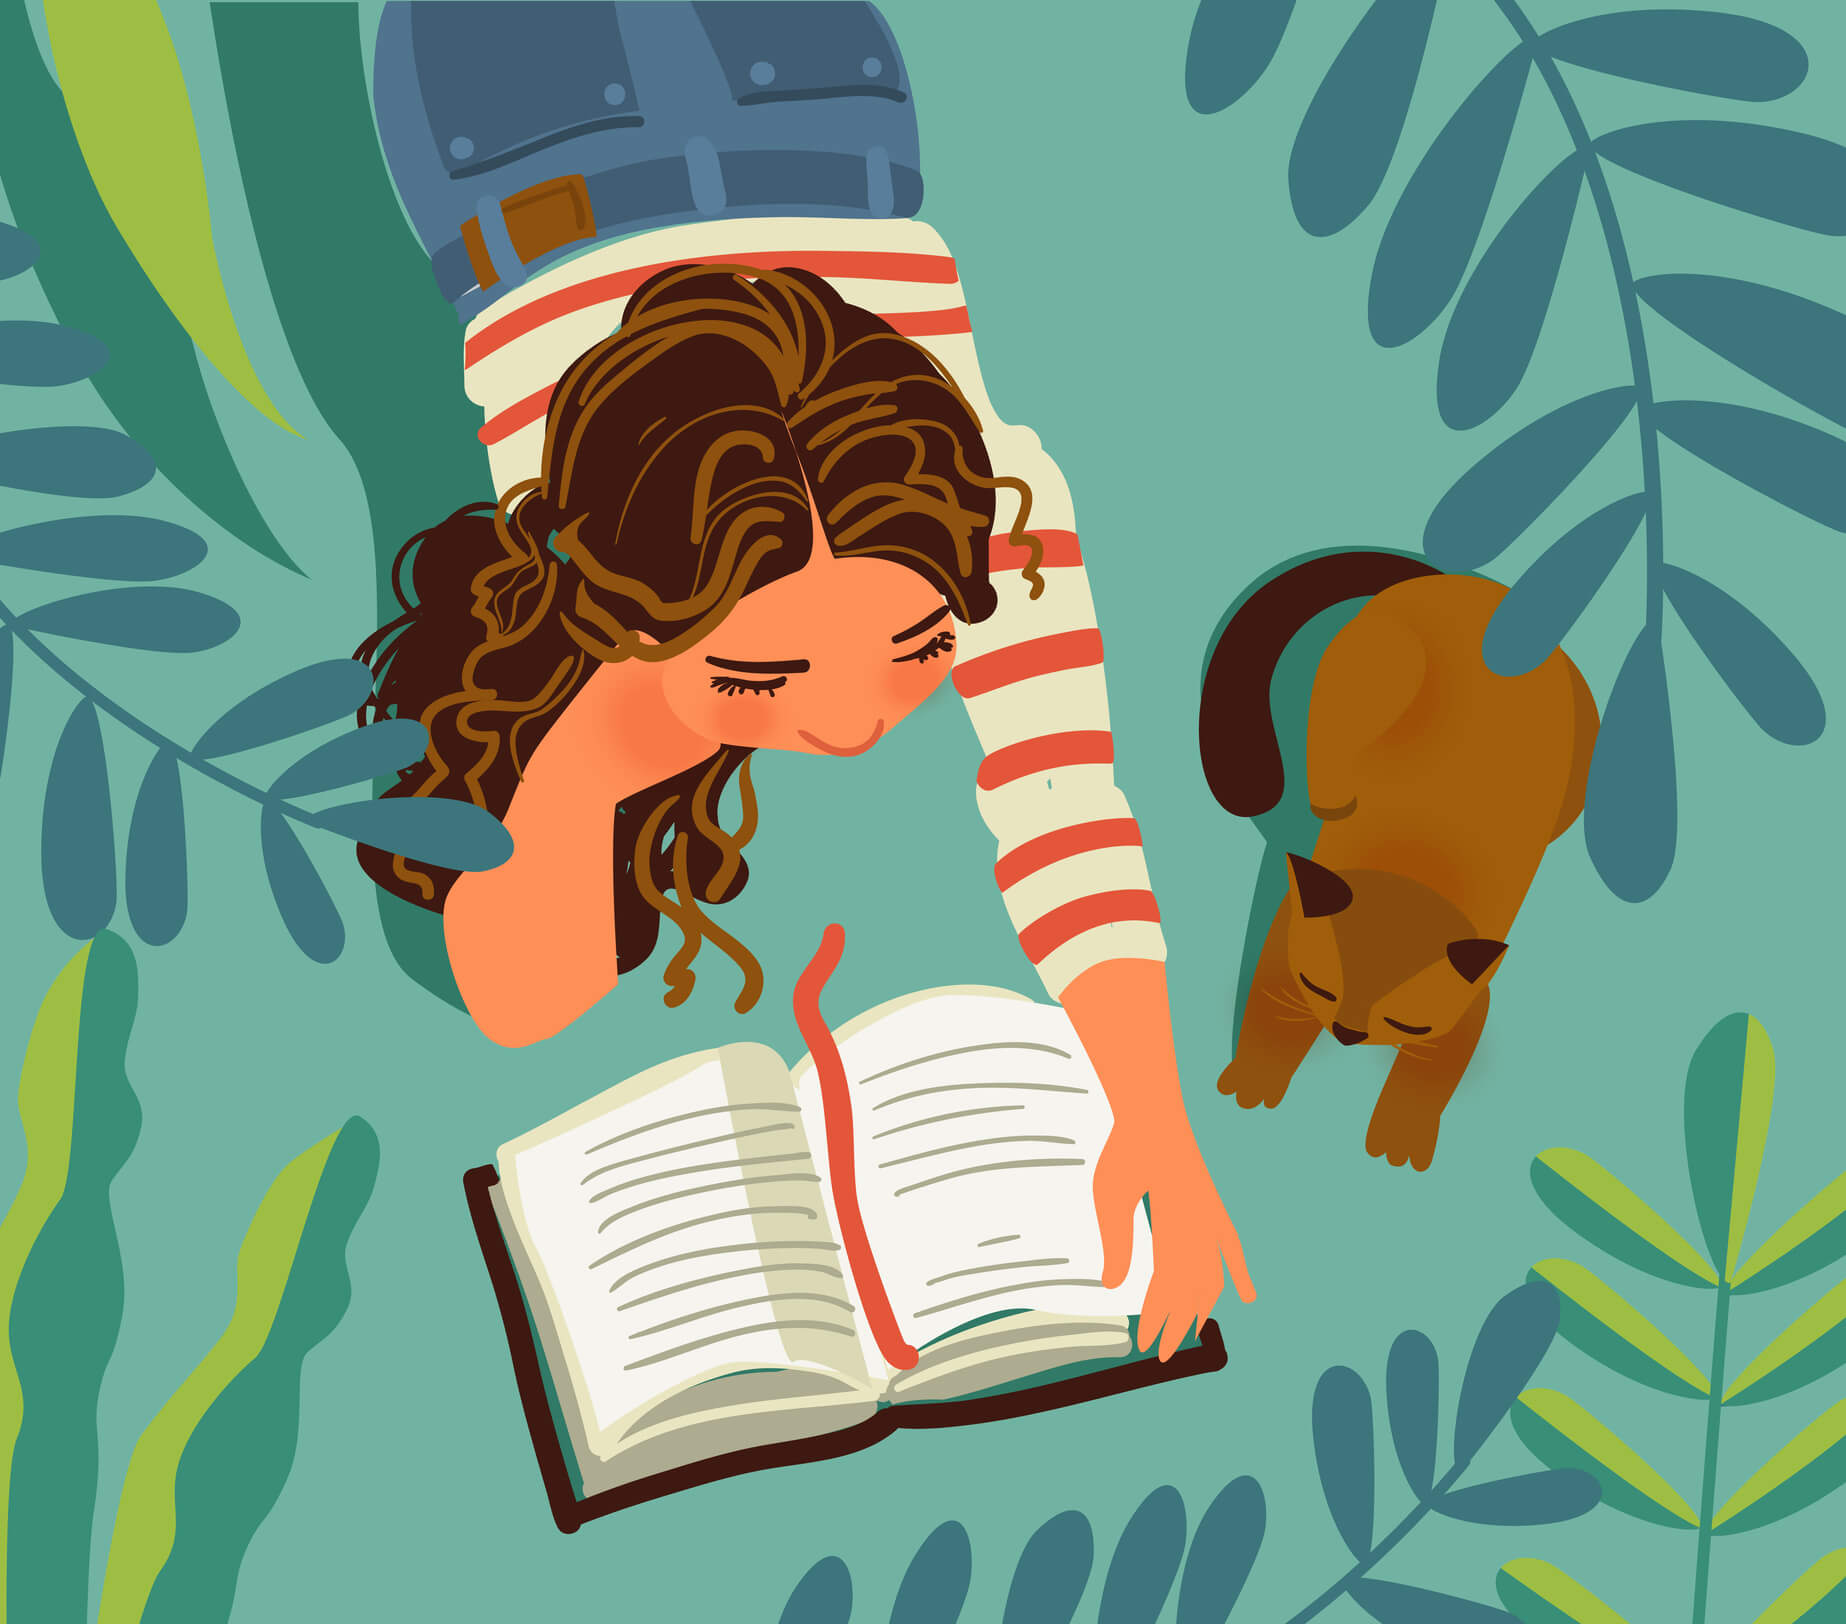 Young girl with cat in the garden. Girl reads a book. Nature landscape background. Summer holidays illustration. Vacation time